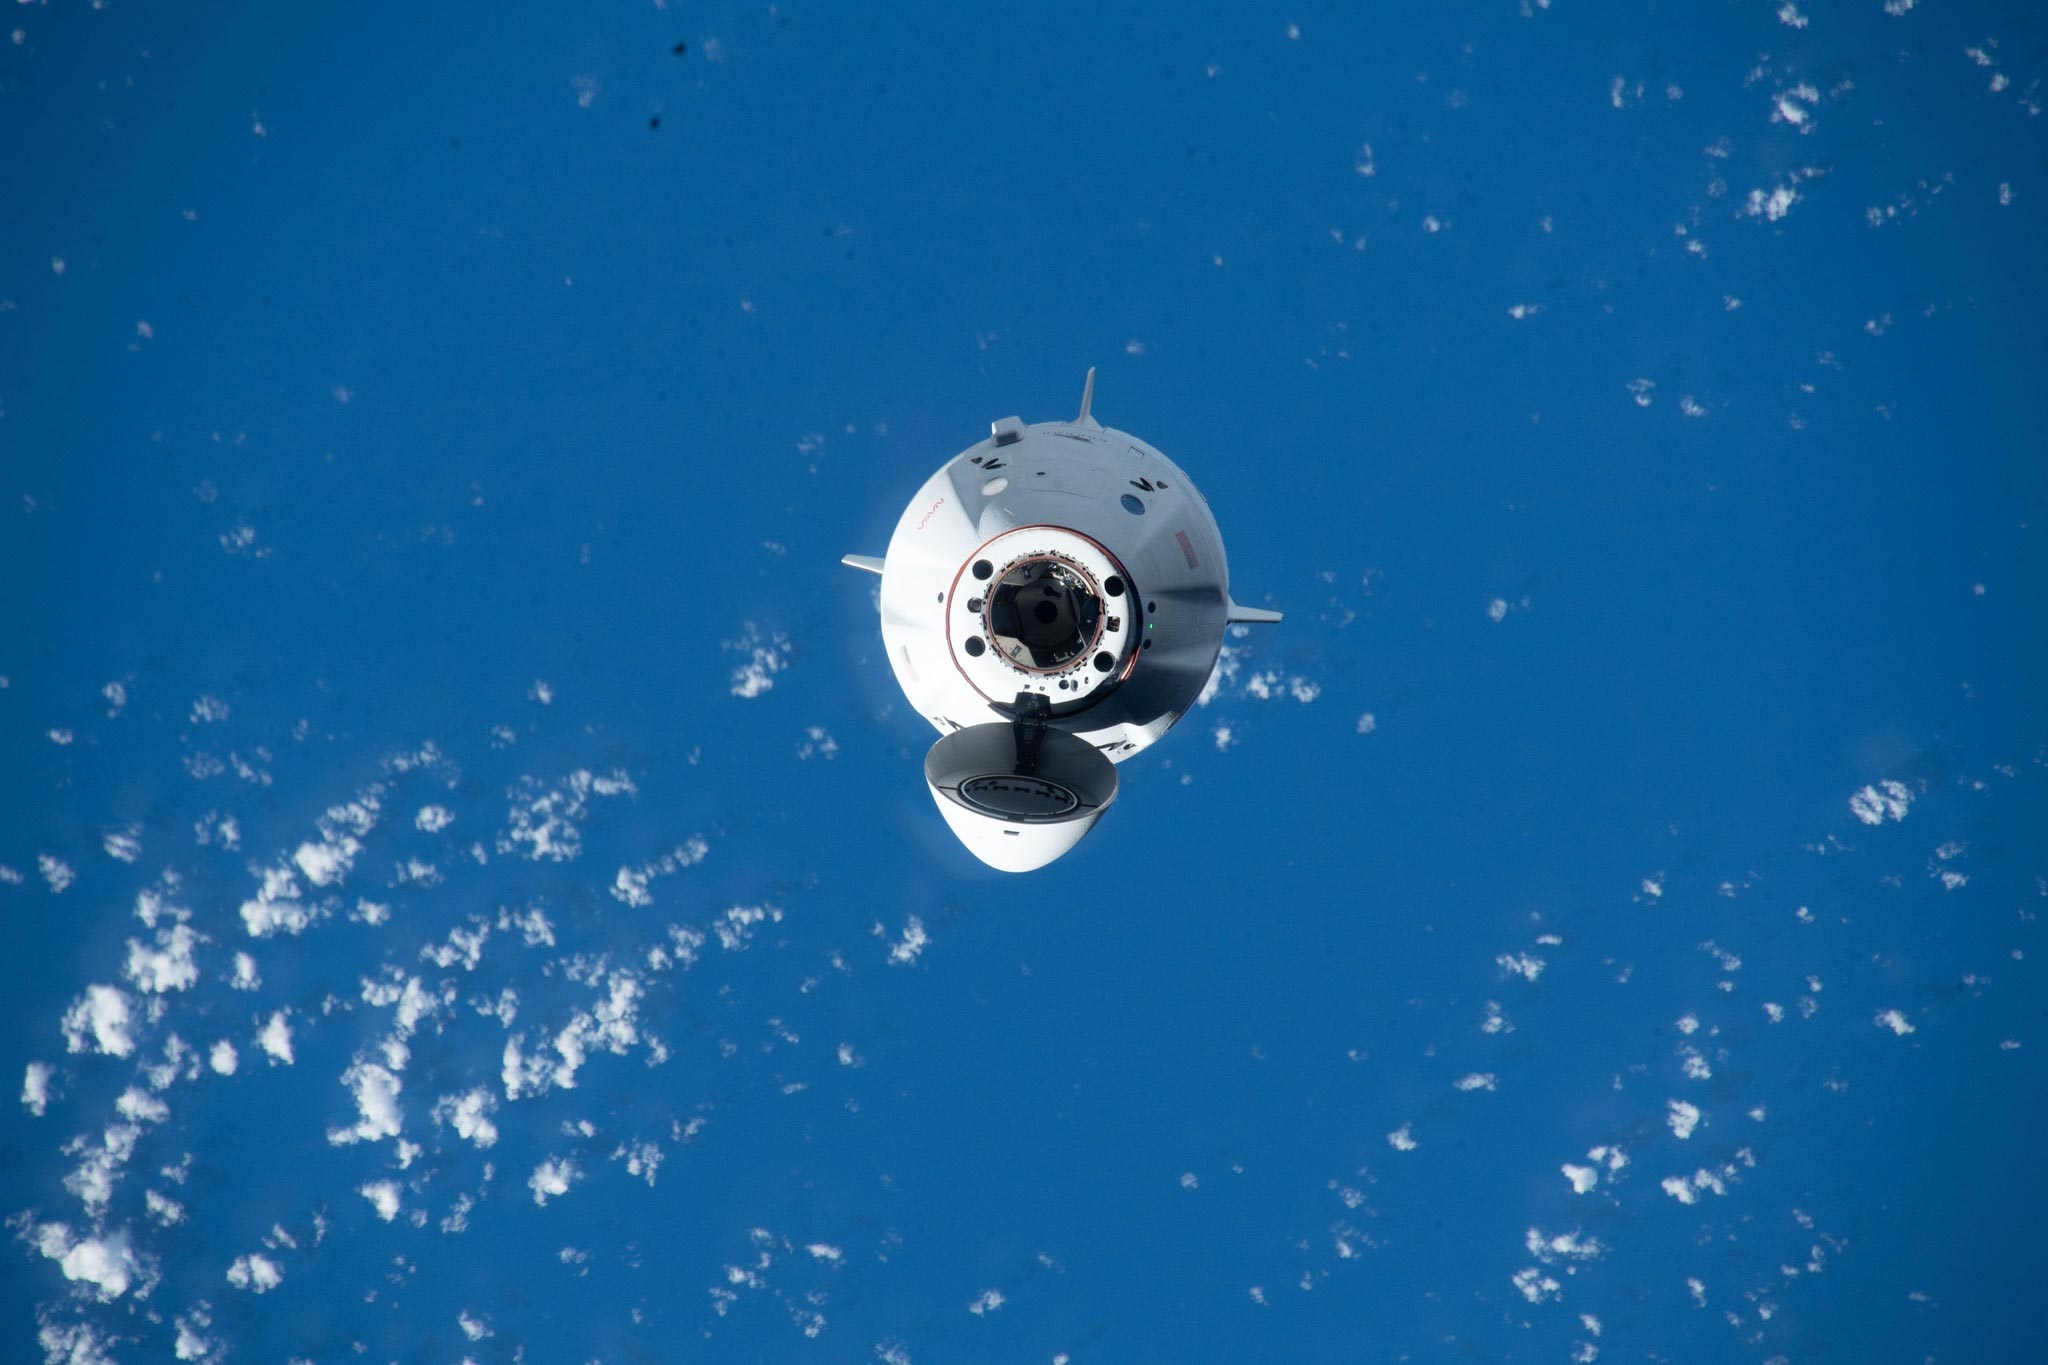 SpaceX Dragon Endurance Crew Ship Approaches ISS